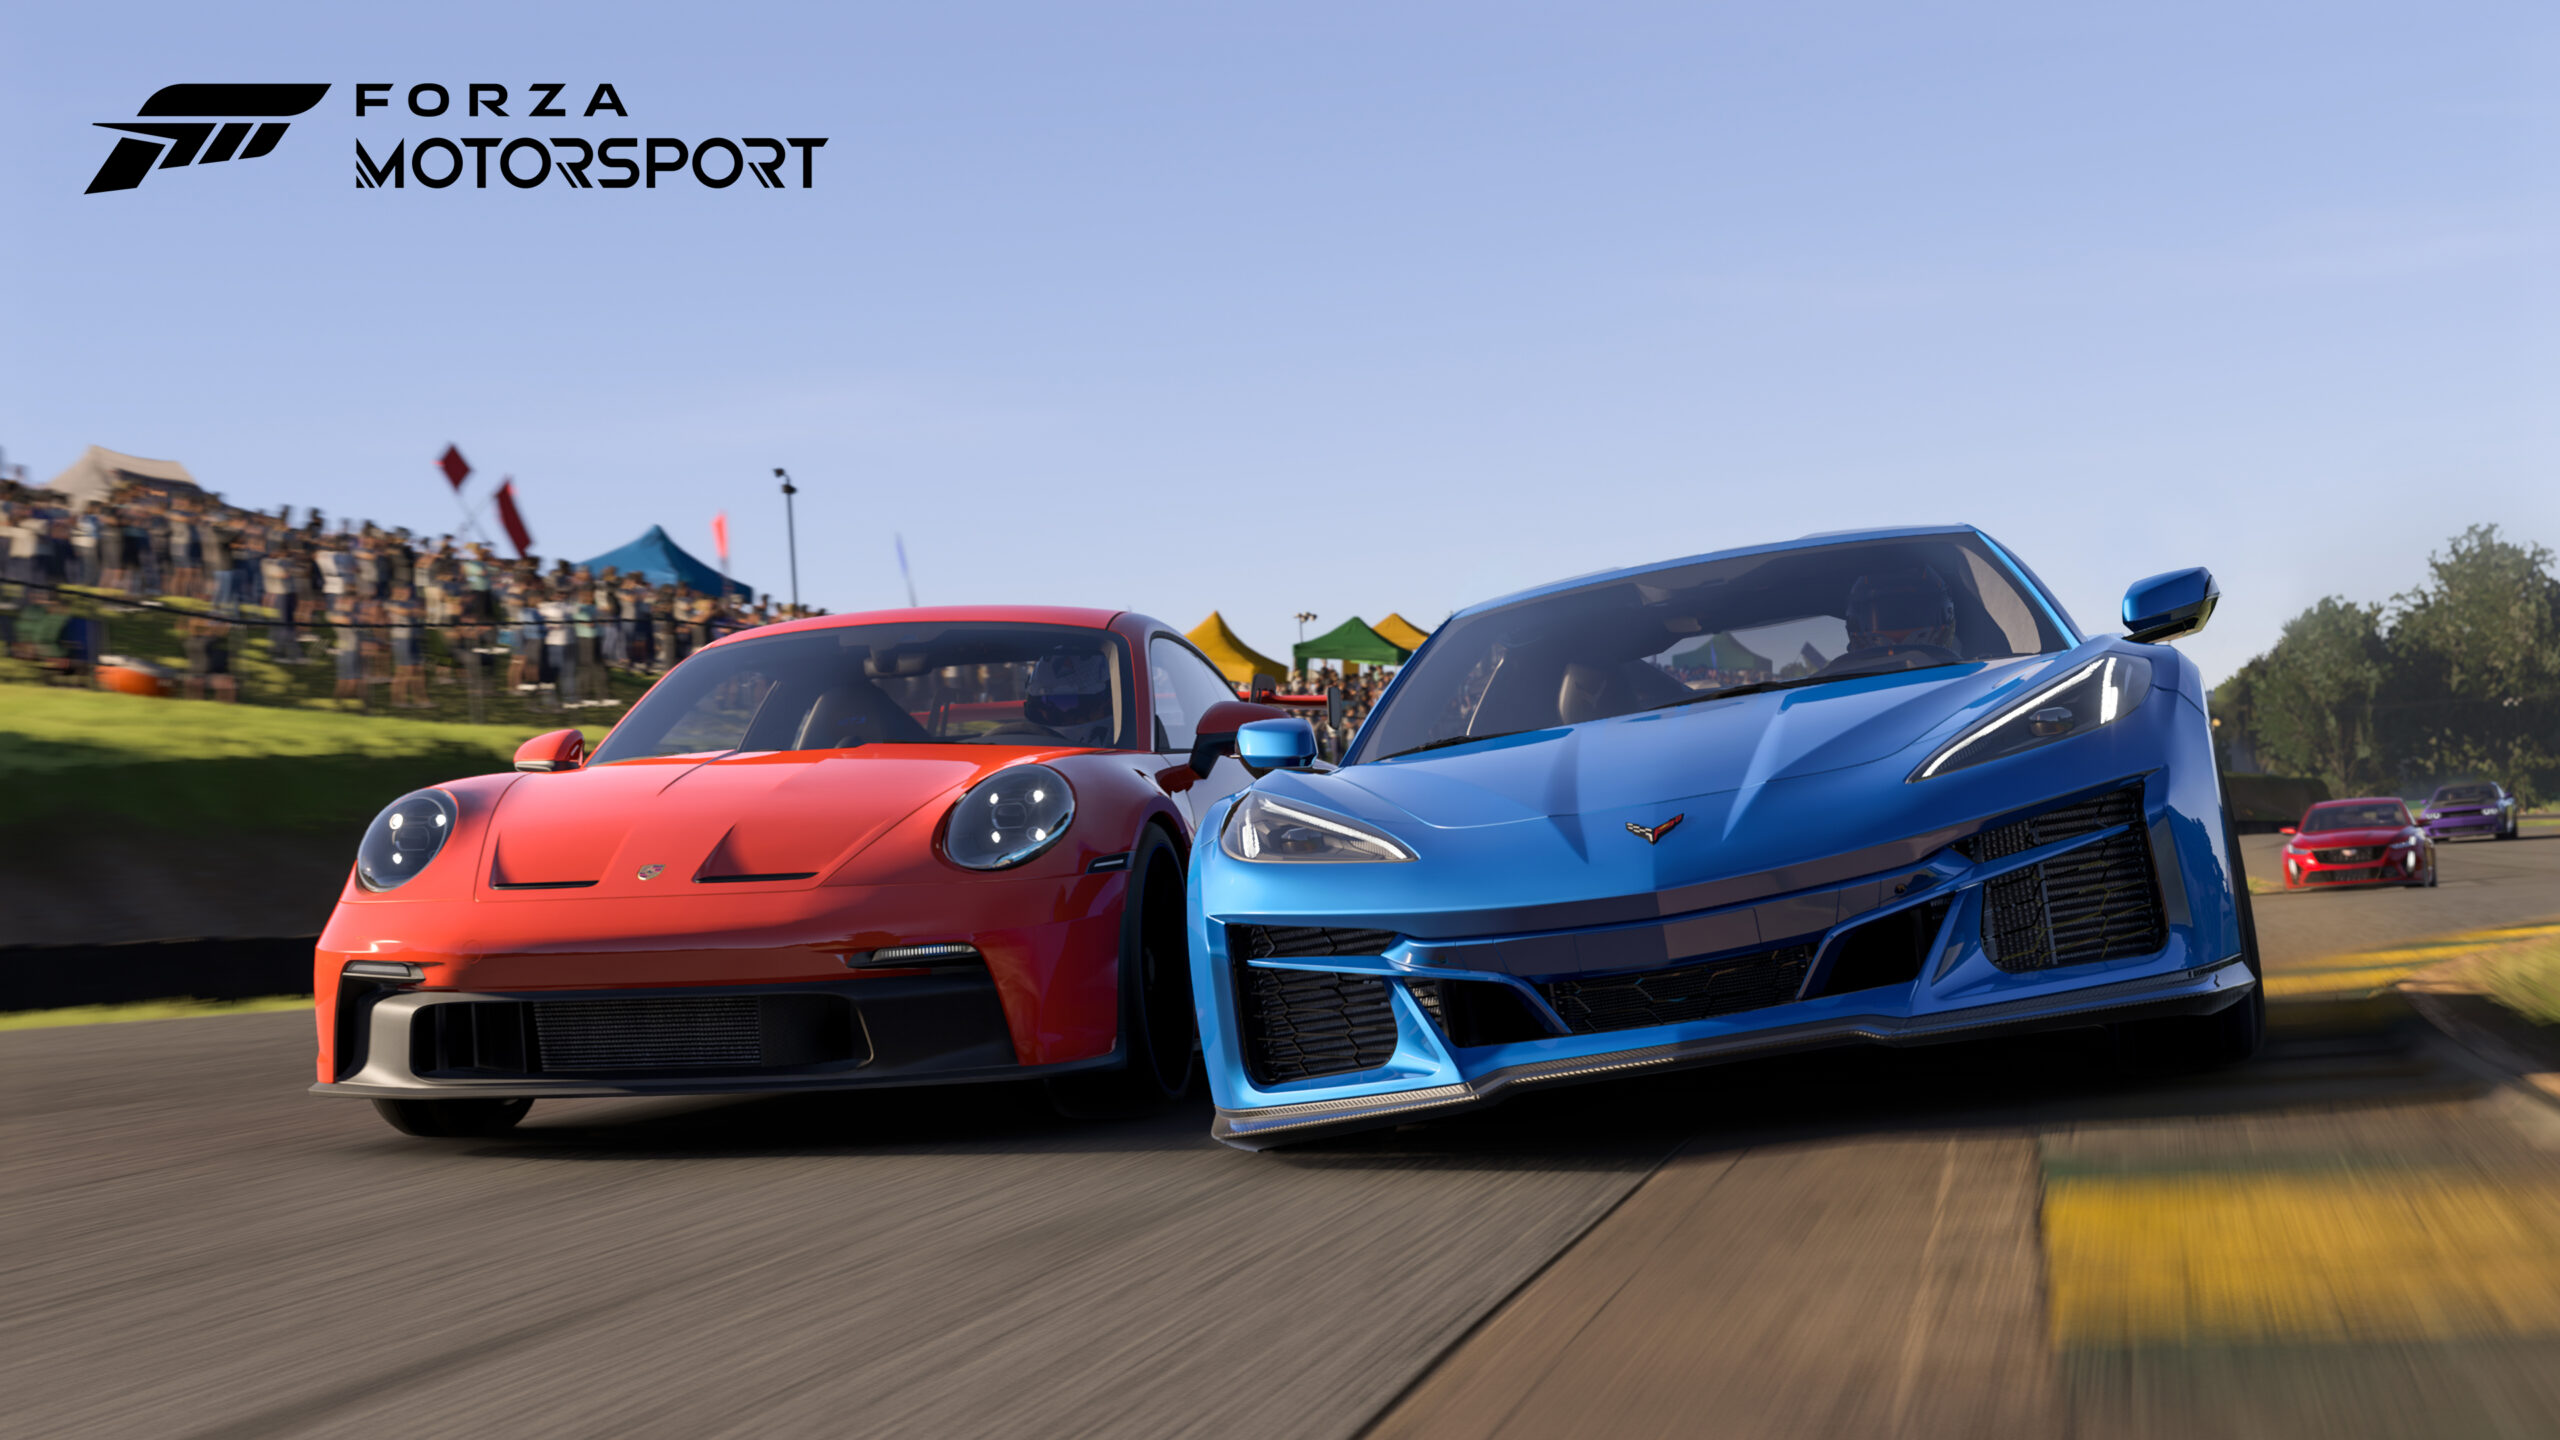 New Forza Motorsport: Everything You Need To Know | The Drive